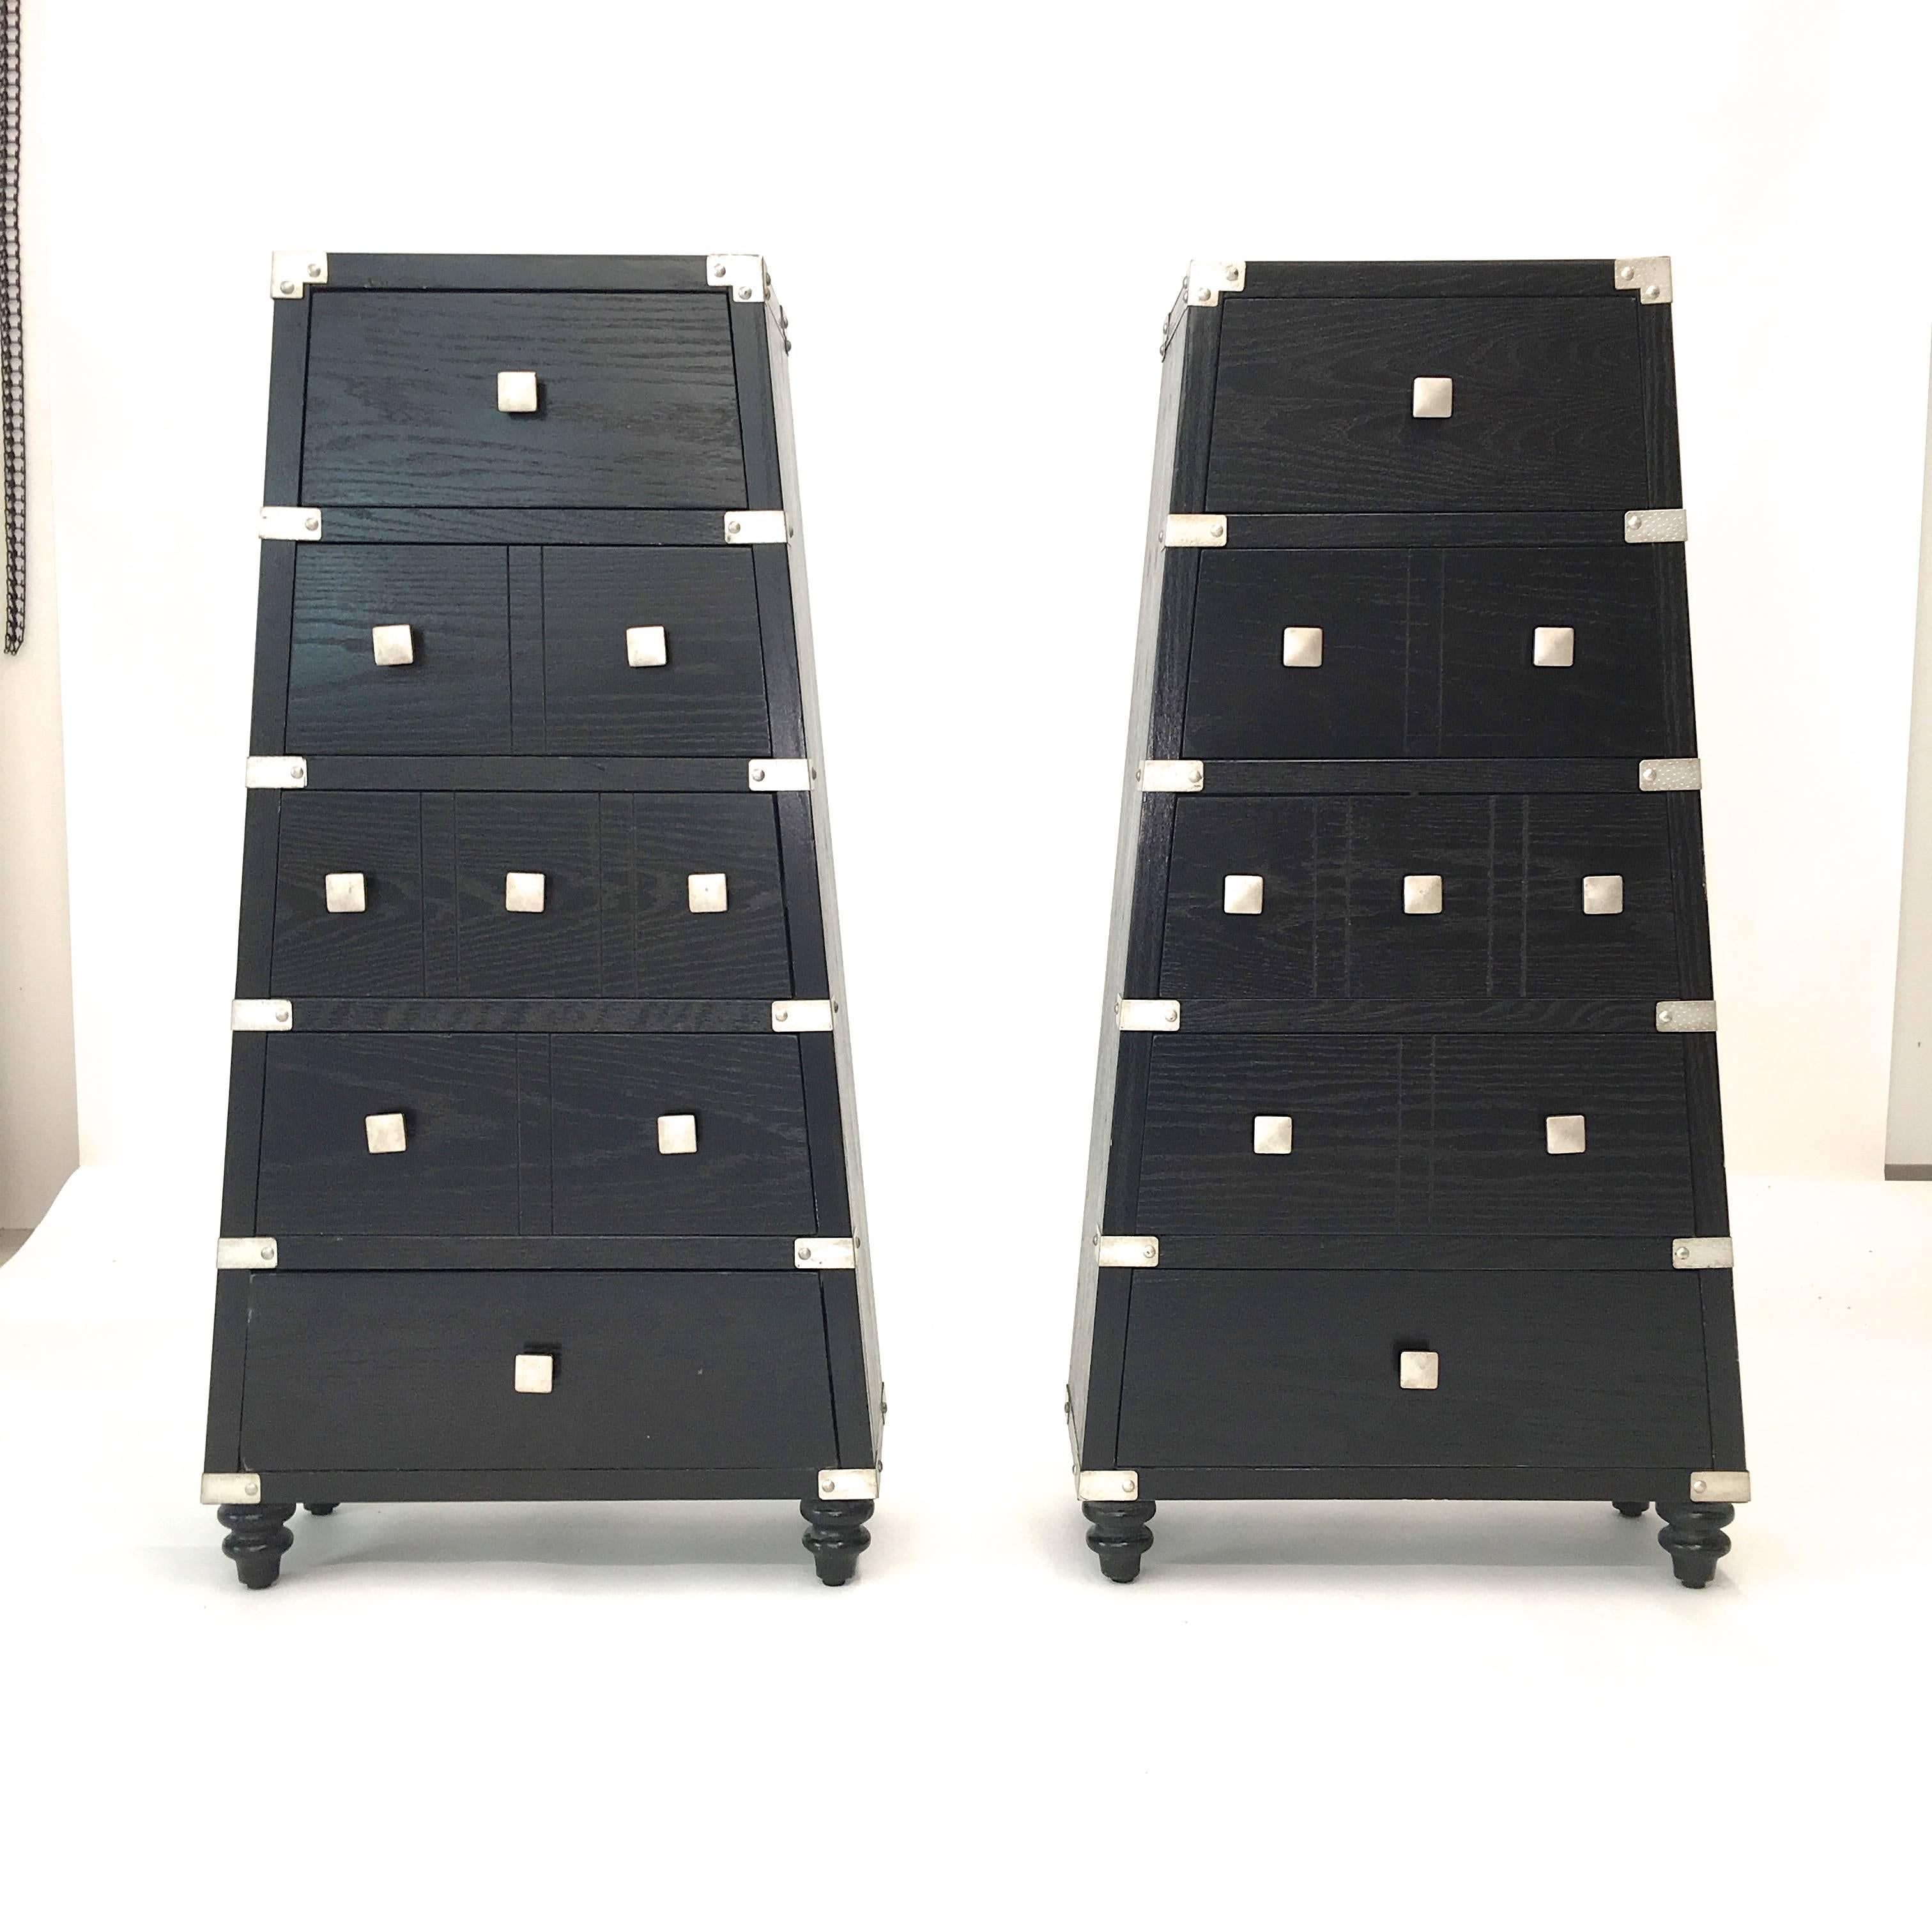 Pair of stylish pyramid form chest of drawers made of ebonized oak and embellished with hammered silver metal accents. 

Sold as a pair.